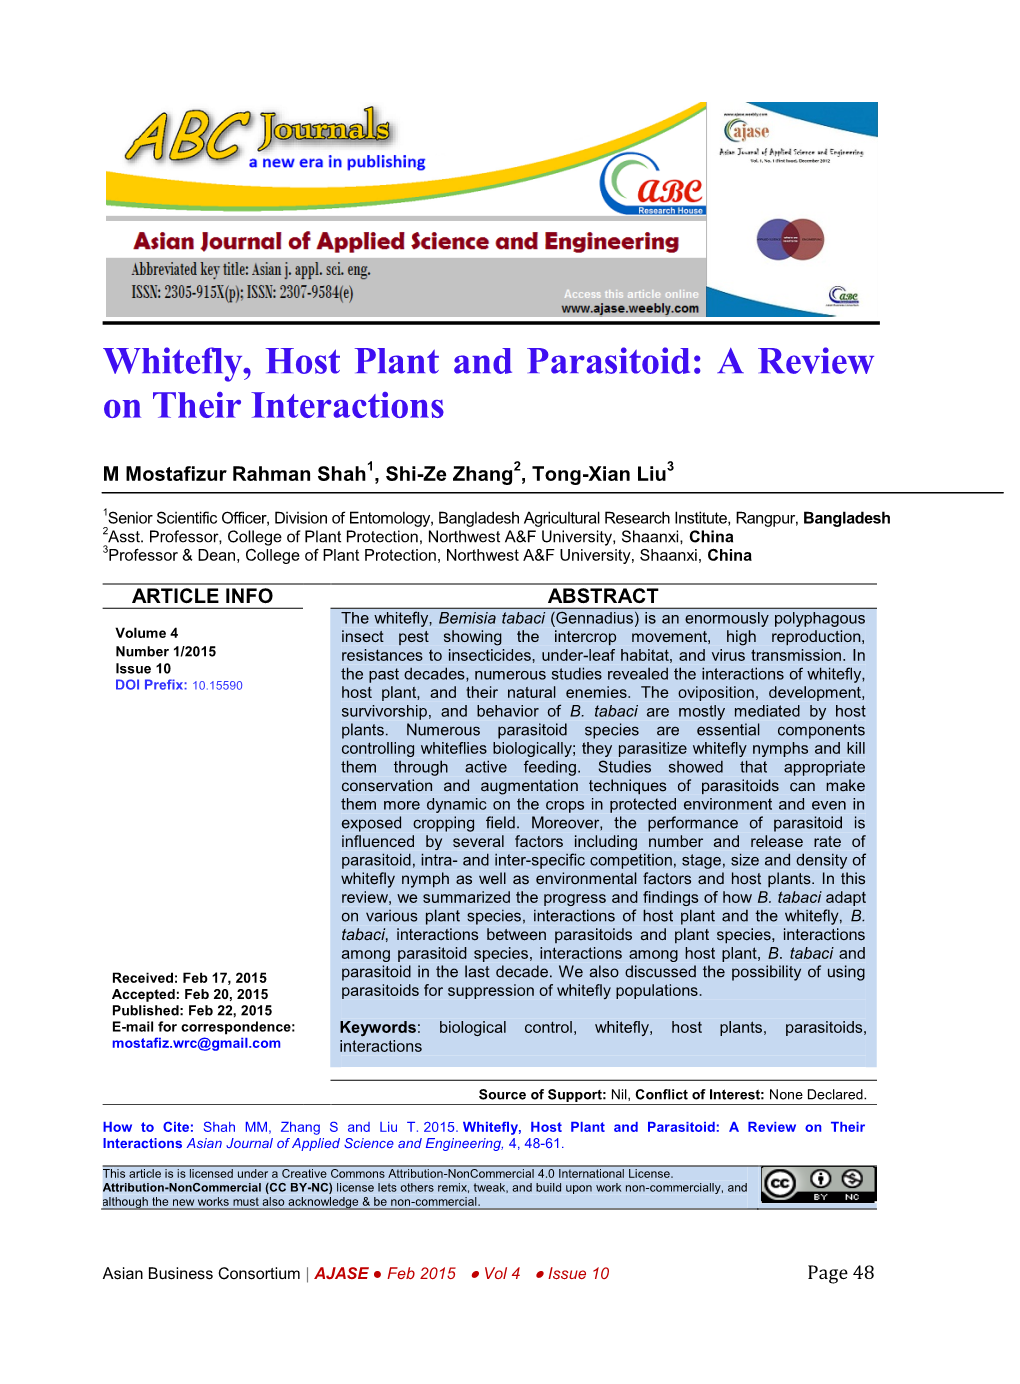 Whitefly, Host Plant and Parasitoid: a Review on Their Interactions